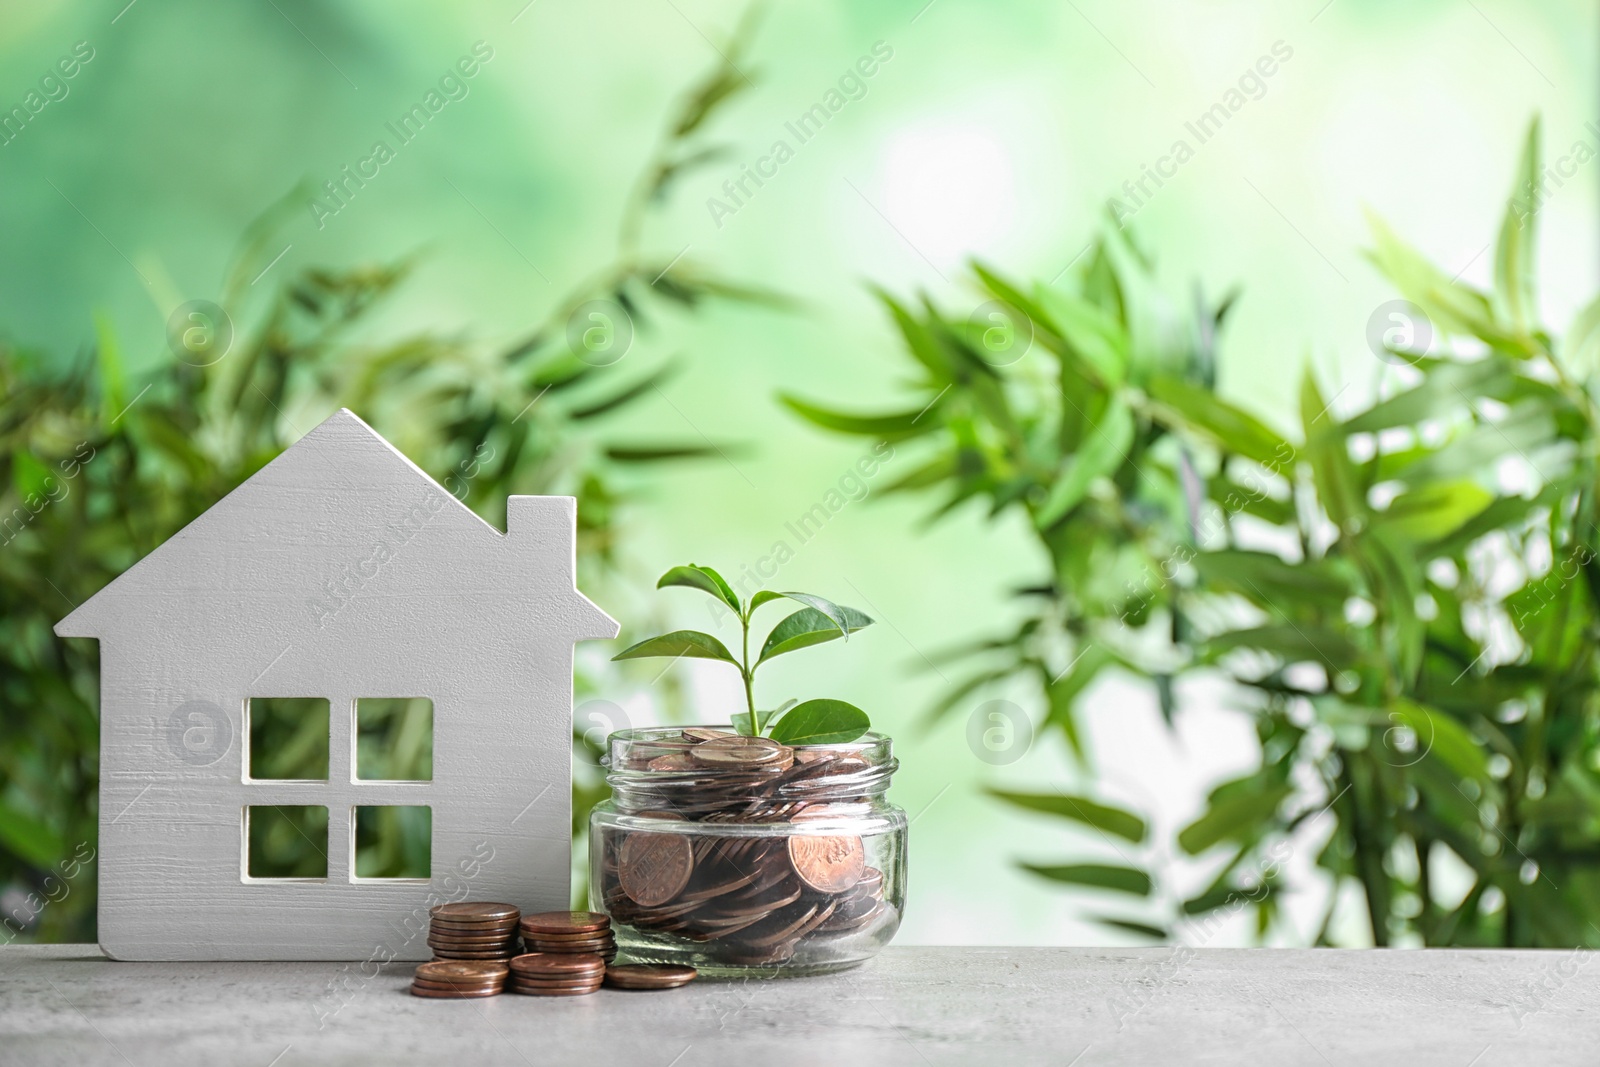 Photo of House model and jar with coins on table against blurred background. Space for text